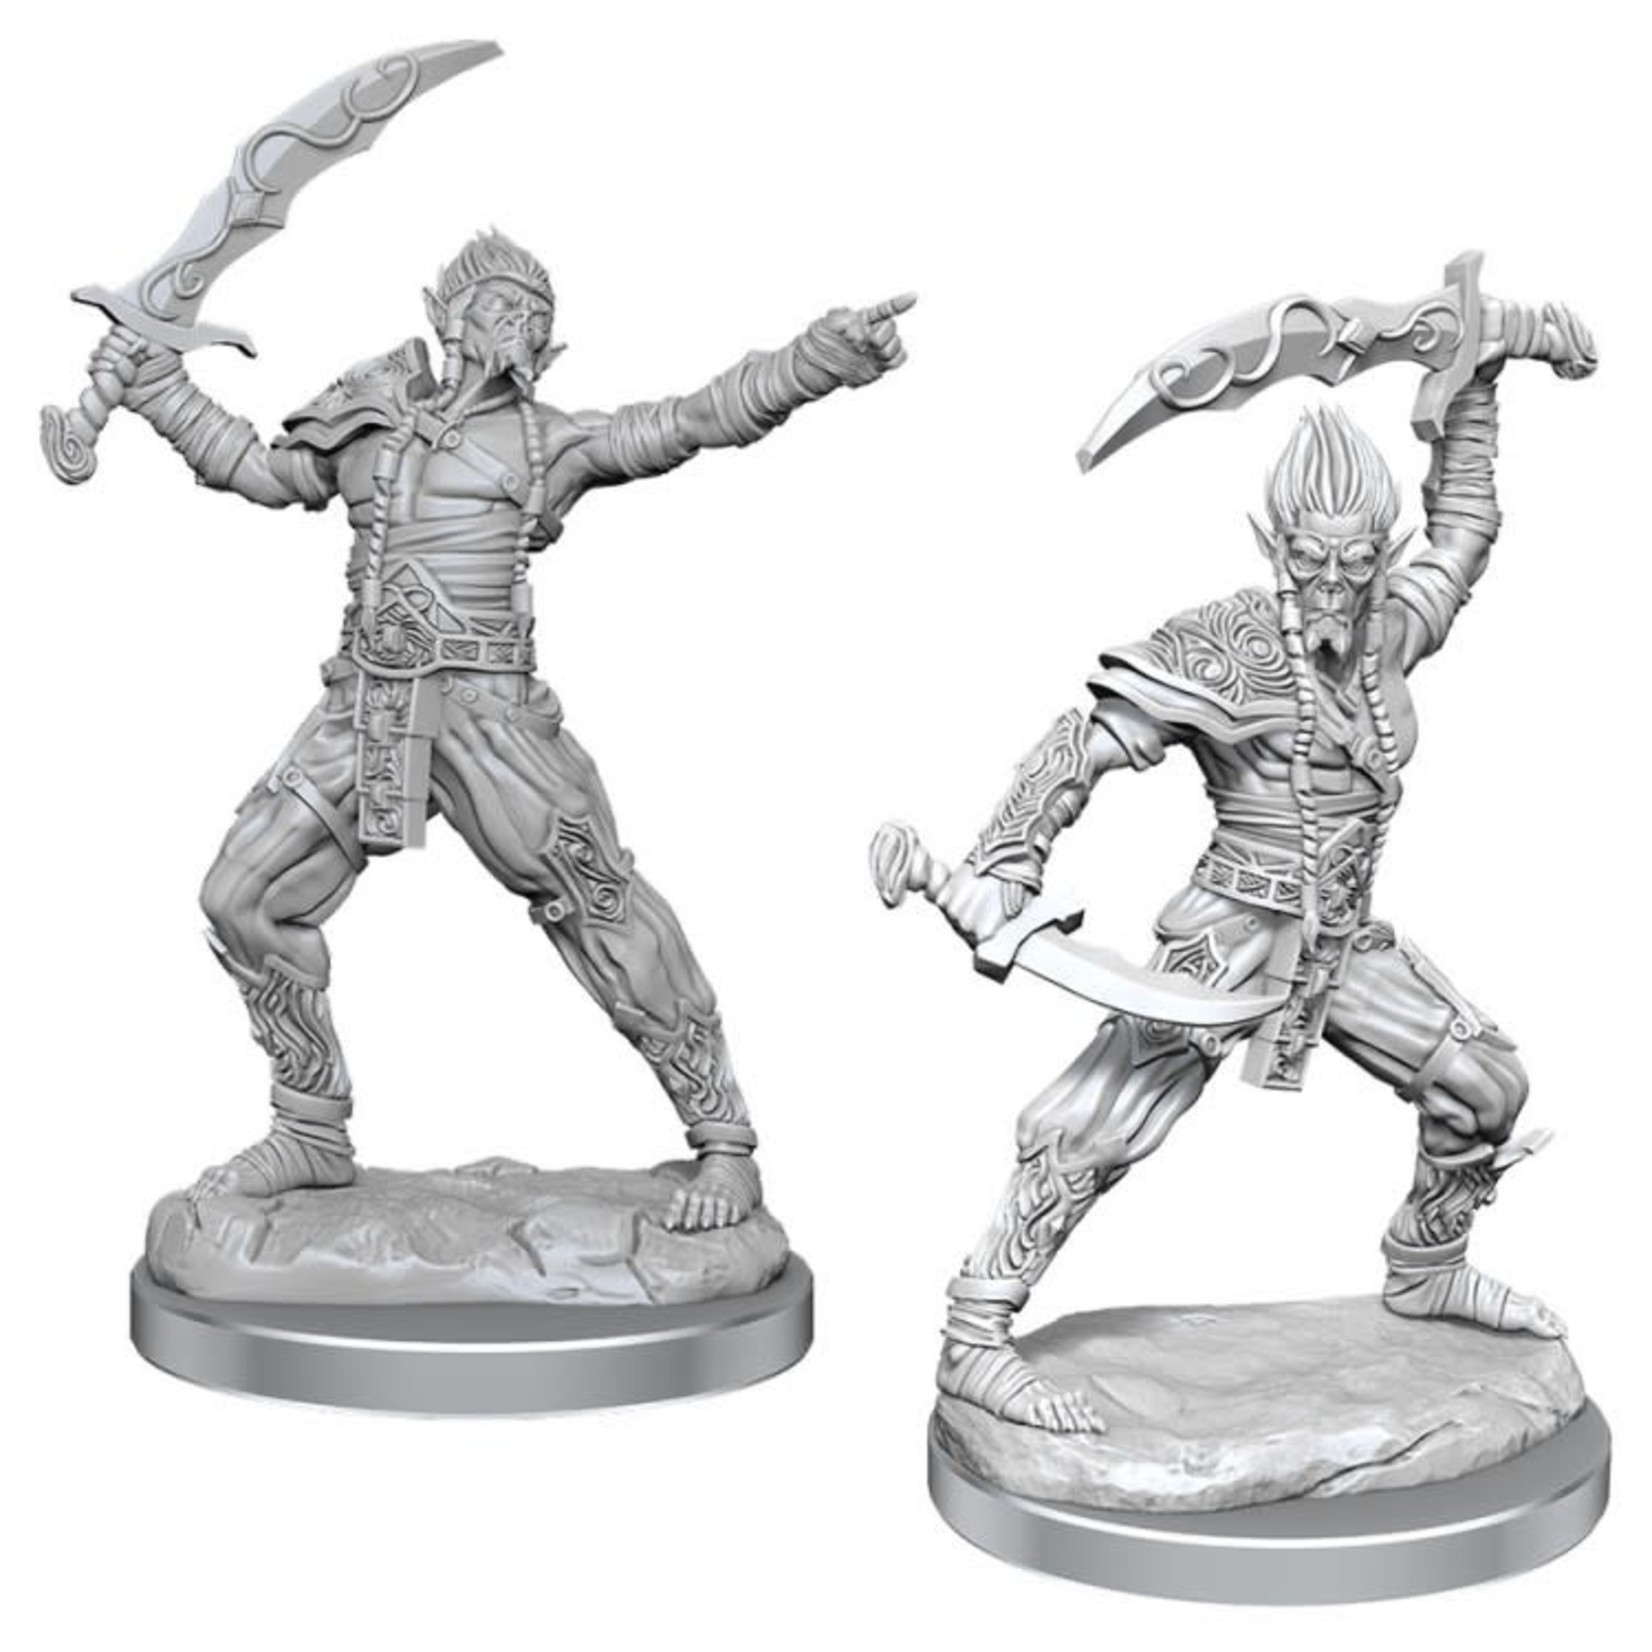 WizKids Dungeons and Dragons Nolzur's Marvelous Minis Githyanki